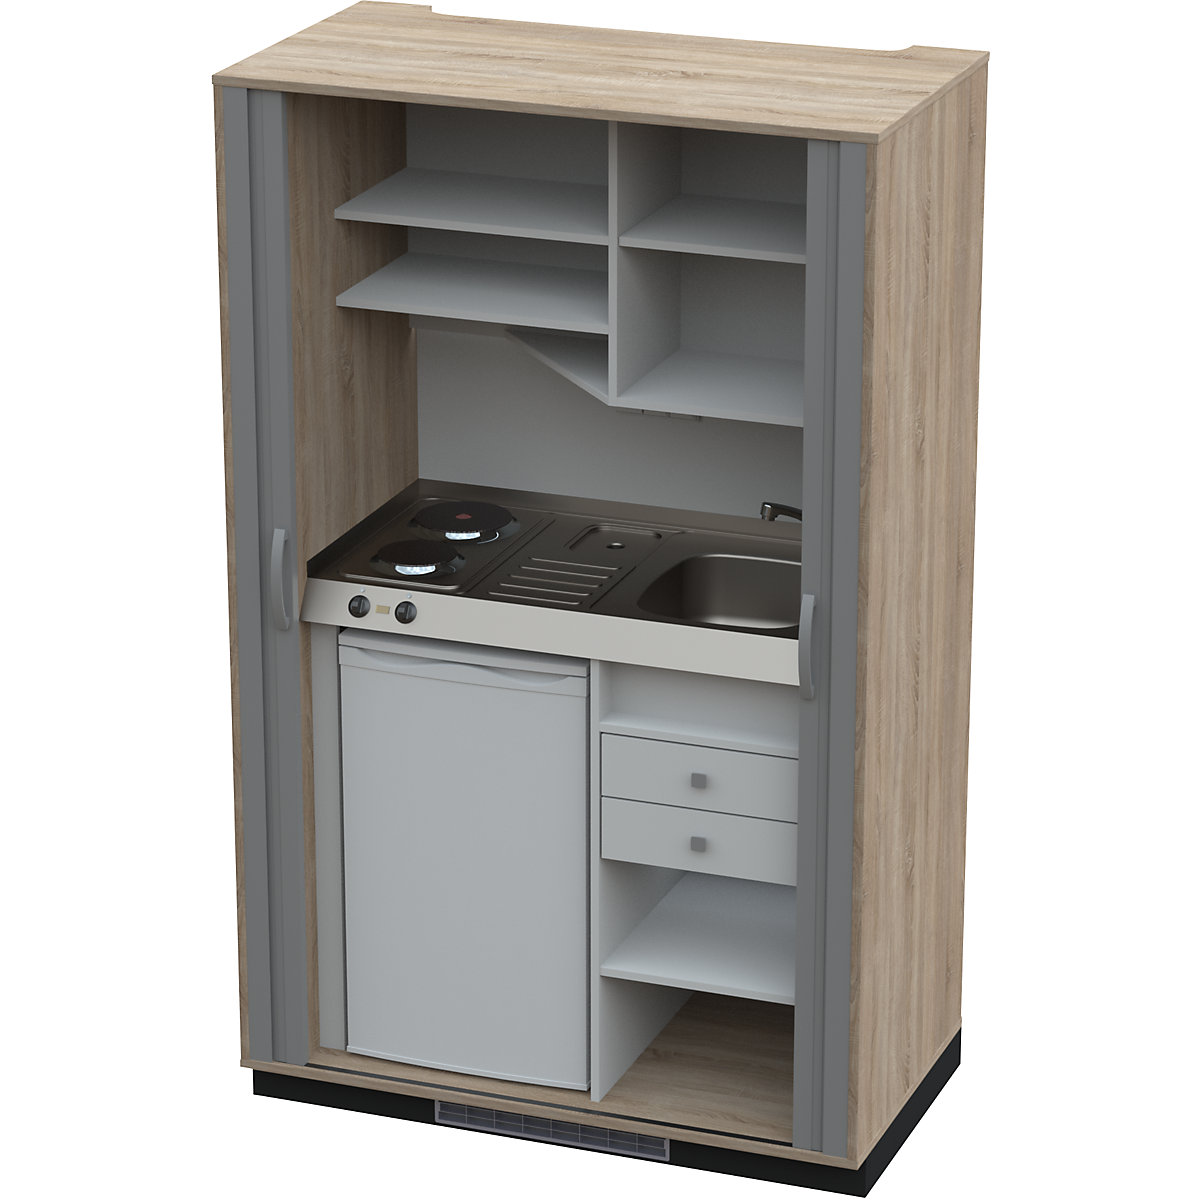 Kitchen unit with roller blind, 2 hotplates, basin at right, oak/charcoal 1956 x 1200 x 650 mm-5